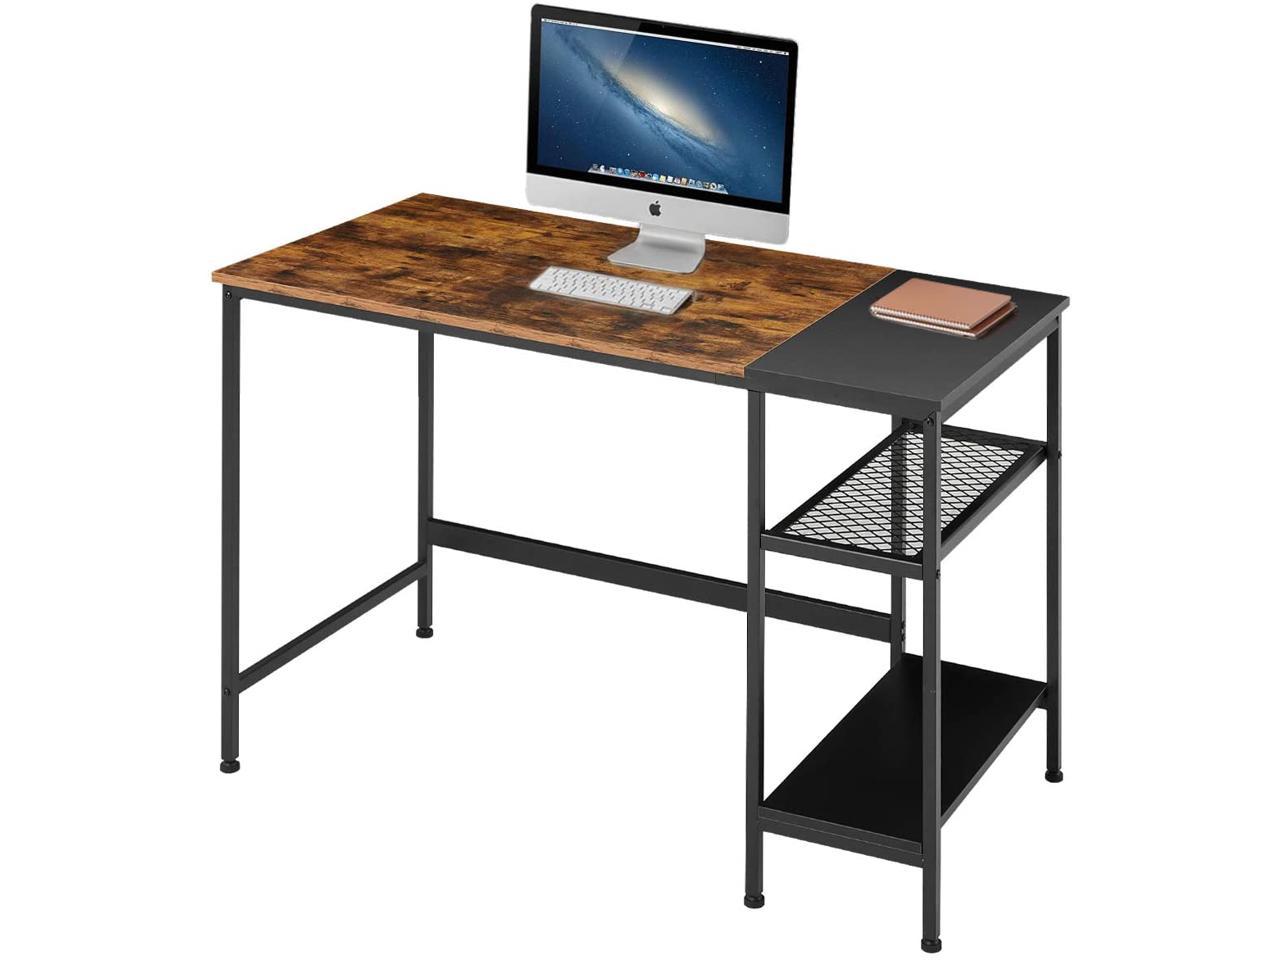 SHOCOKO Rustic Computer Desk Industrial Wood and Metal X Writing Desk 47 inch Computer Table for Home Office